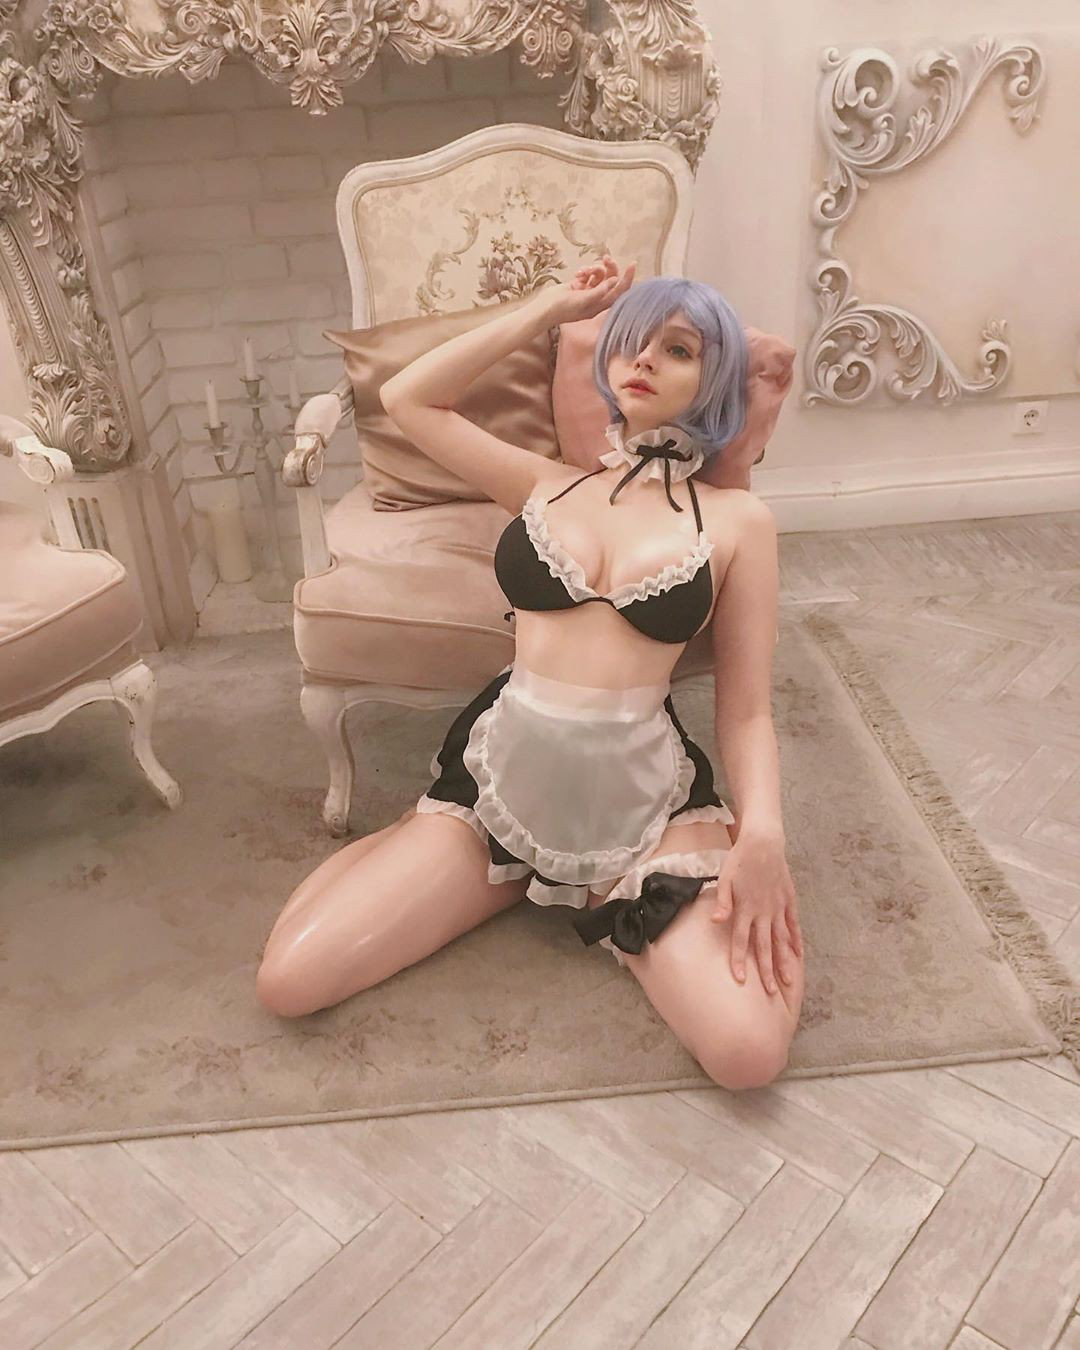 Watch the Photo by FapCosplay with the username @FapCosplay, posted on November 20, 2019. The post is about the topic Fap Cosplay. and the text says 'Shadory as Rem Re Zero
#nsfwcosplay #sexycosplay #cosplaynudes #cosplaygirls #cosplay'